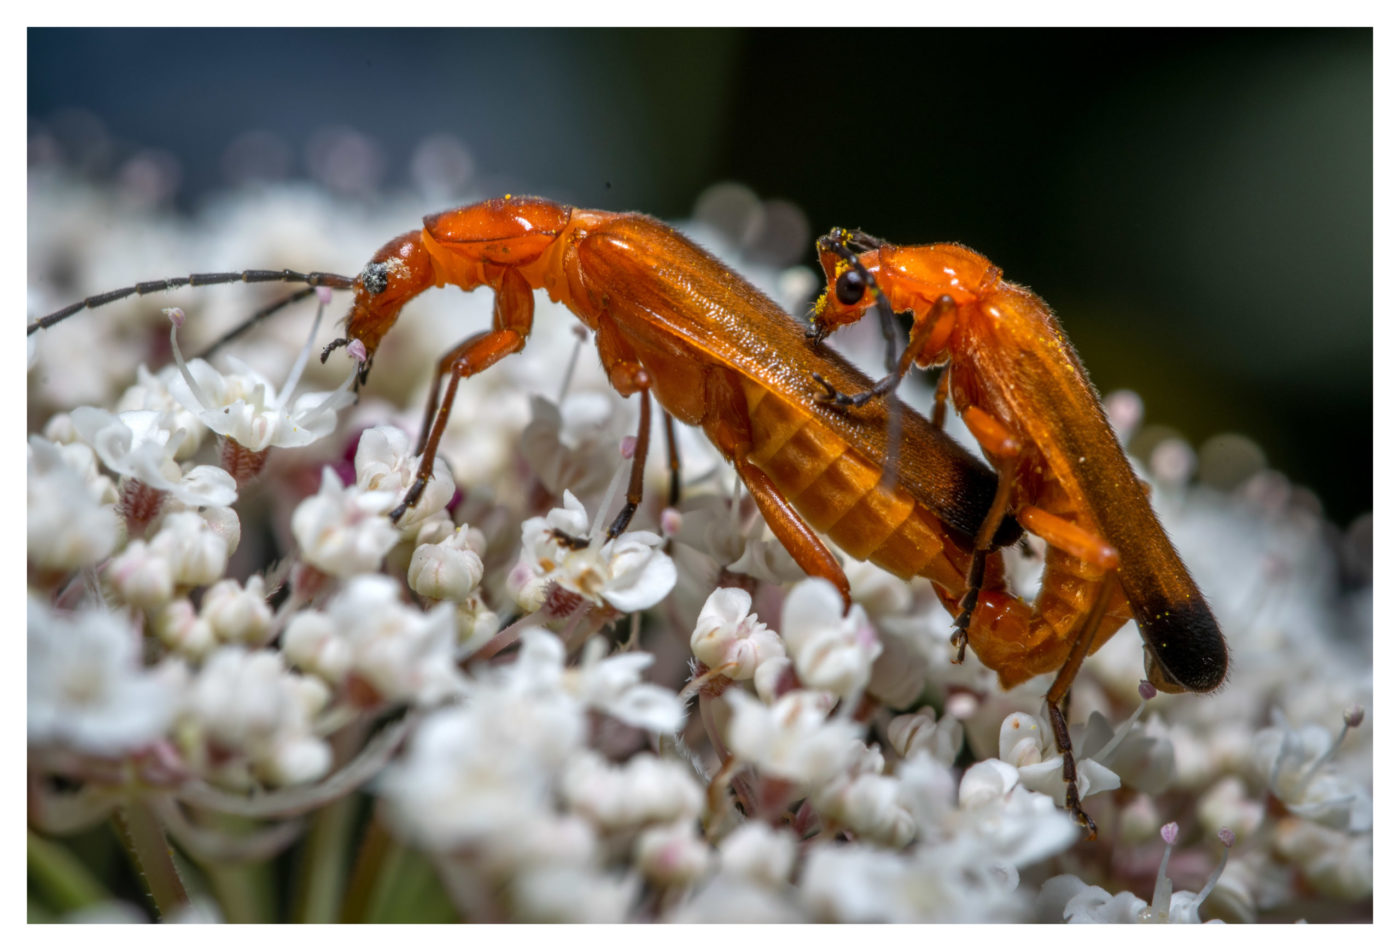 Red Soldier Beetles, Rhagonycha fulva, mating on a bed of small white flowers